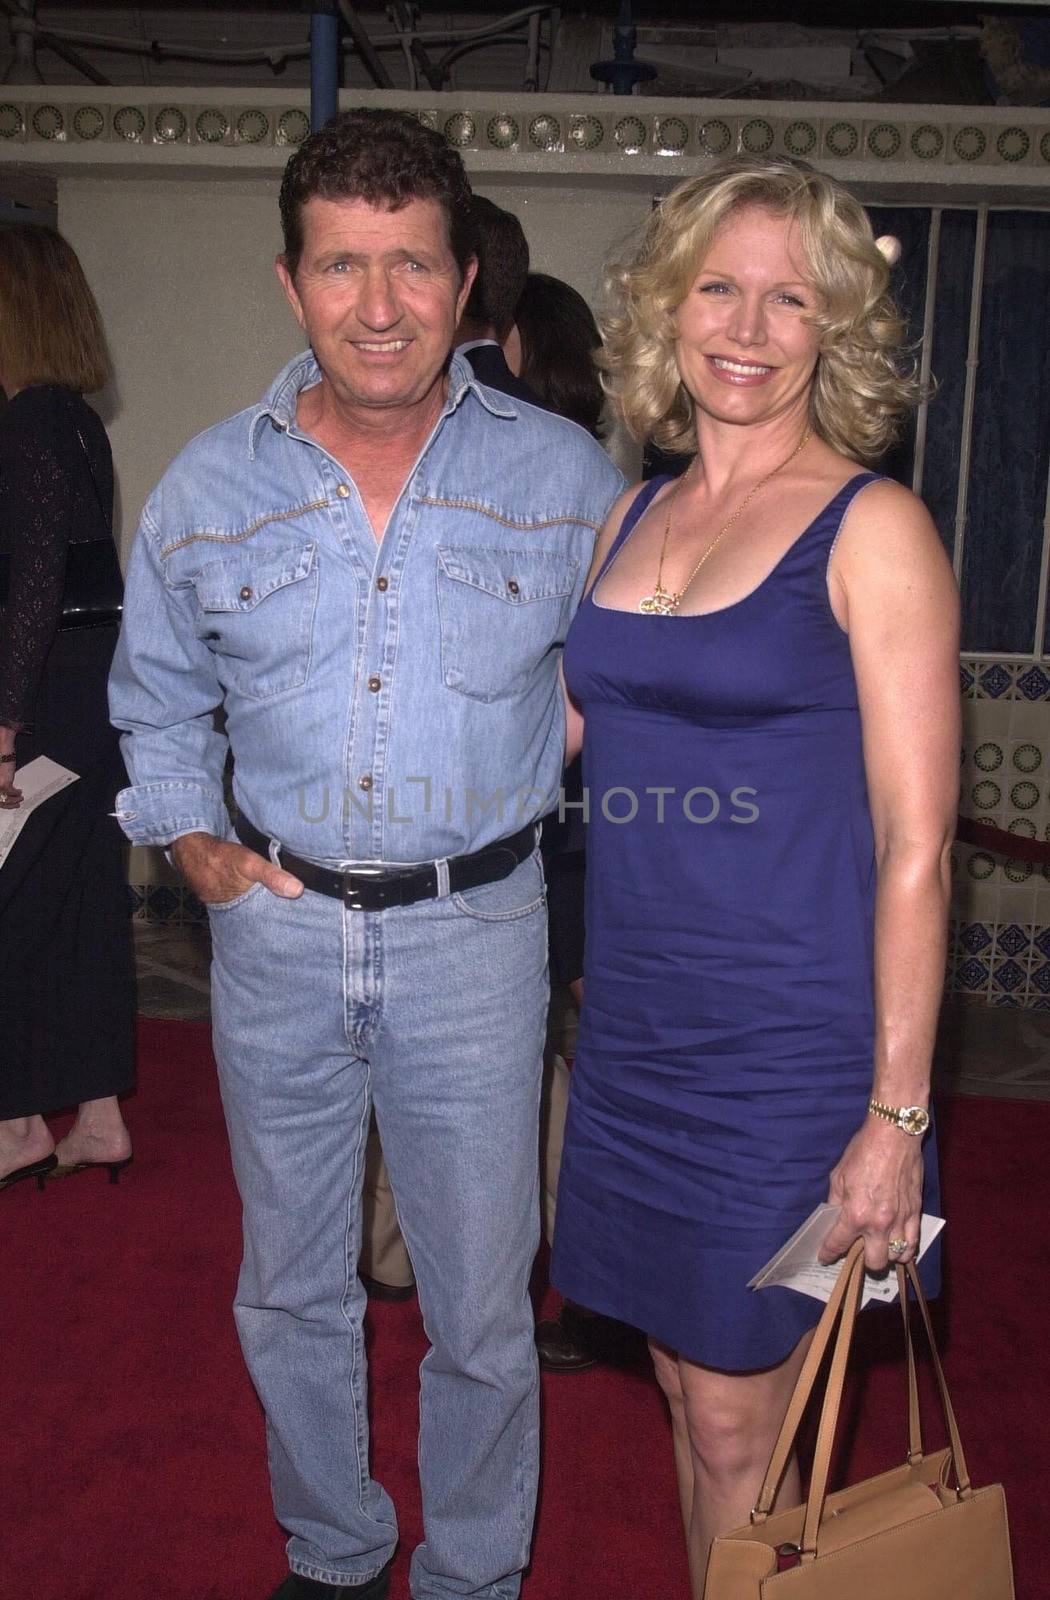 Mac Davis and Wife at the premiere of "Space Cowboys" in Westwood. 08-01-00